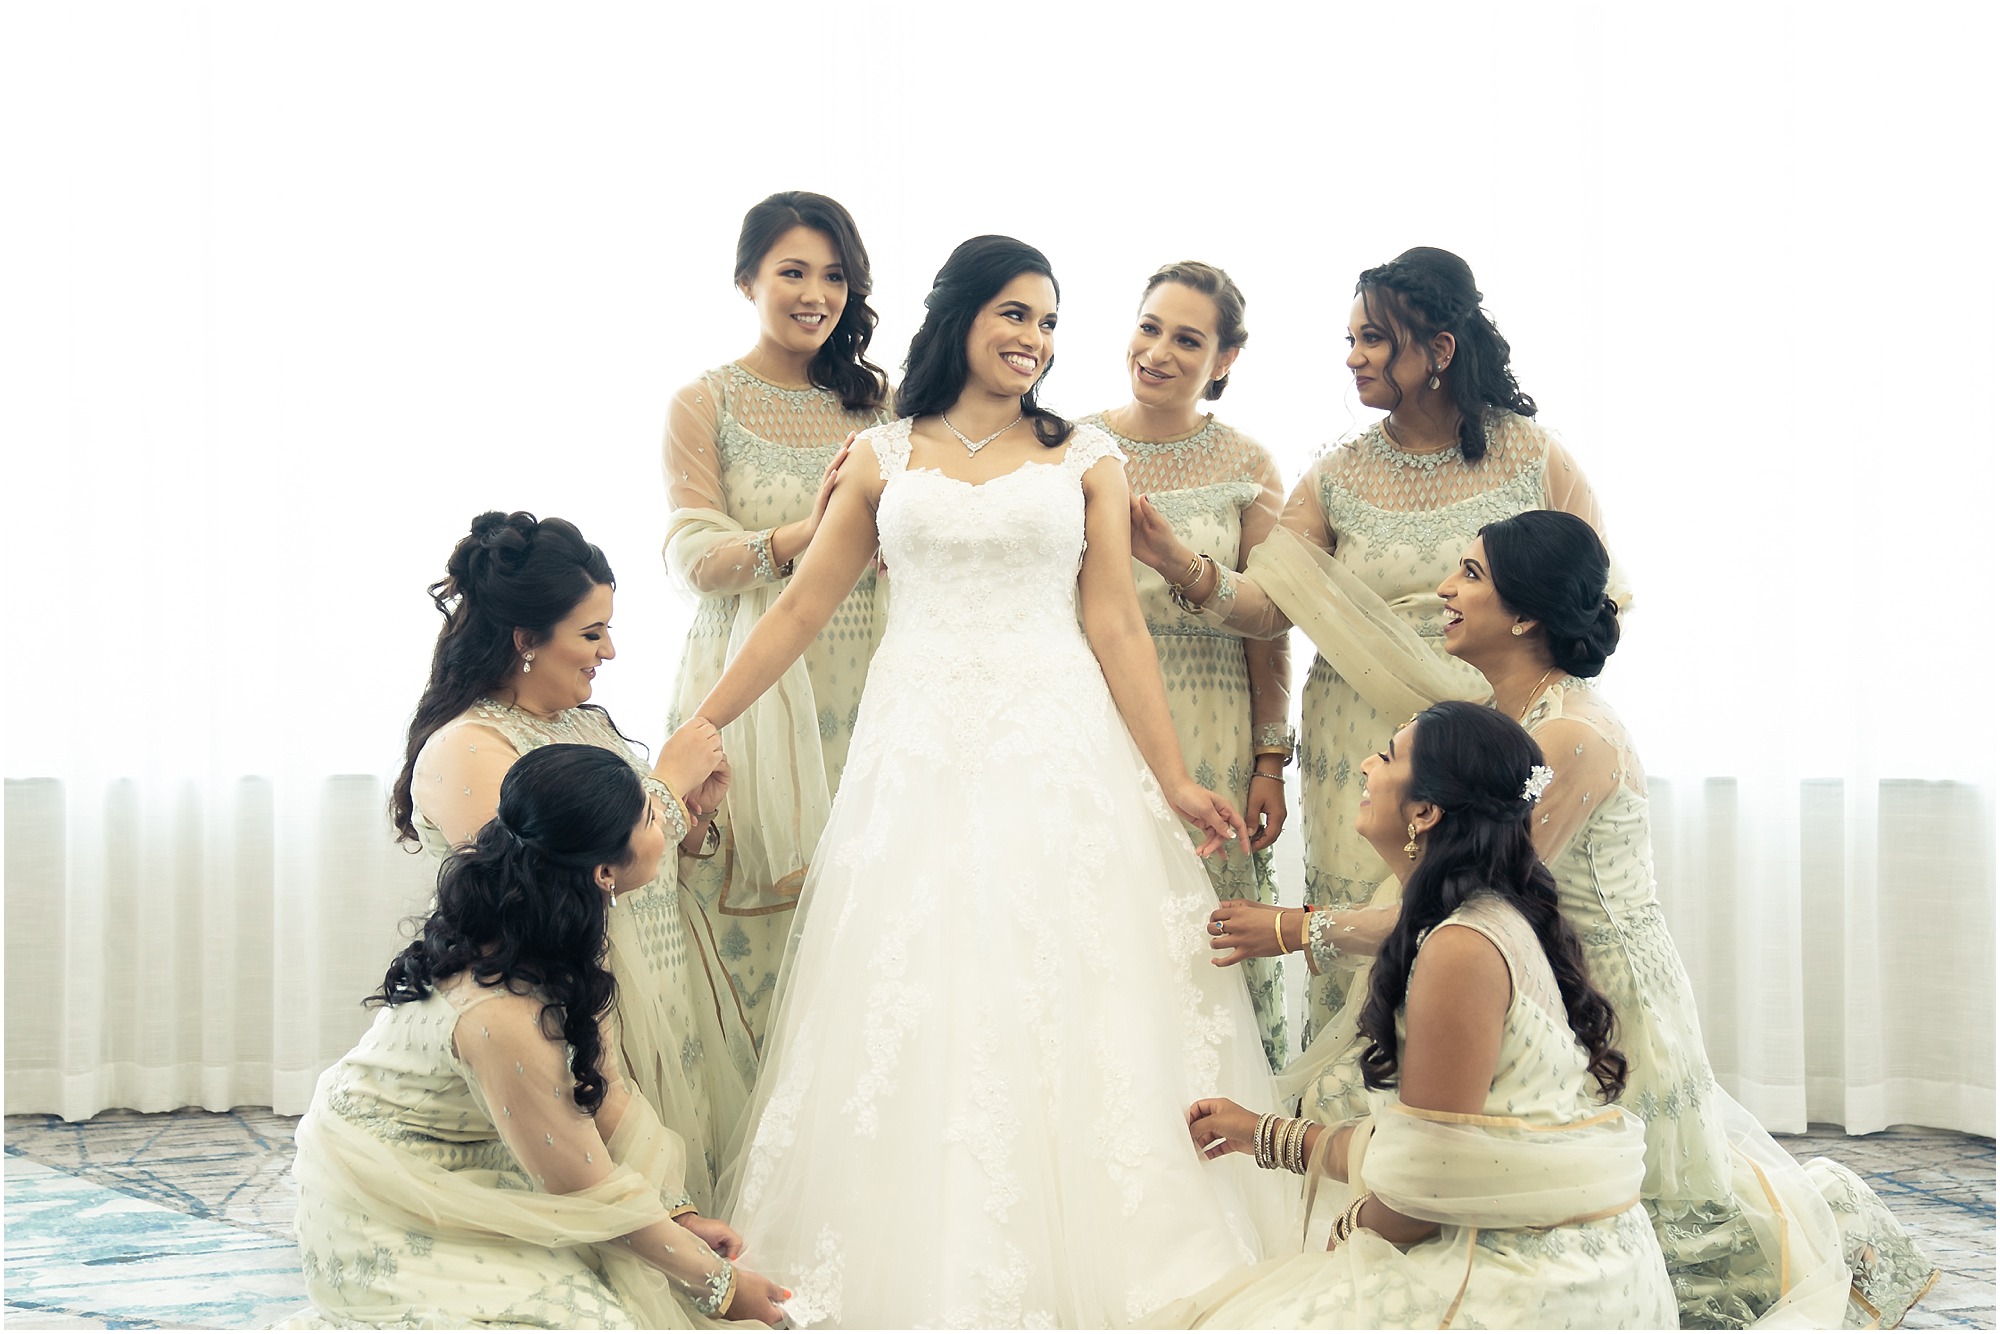 Christian Wedding Sarees and Gowns